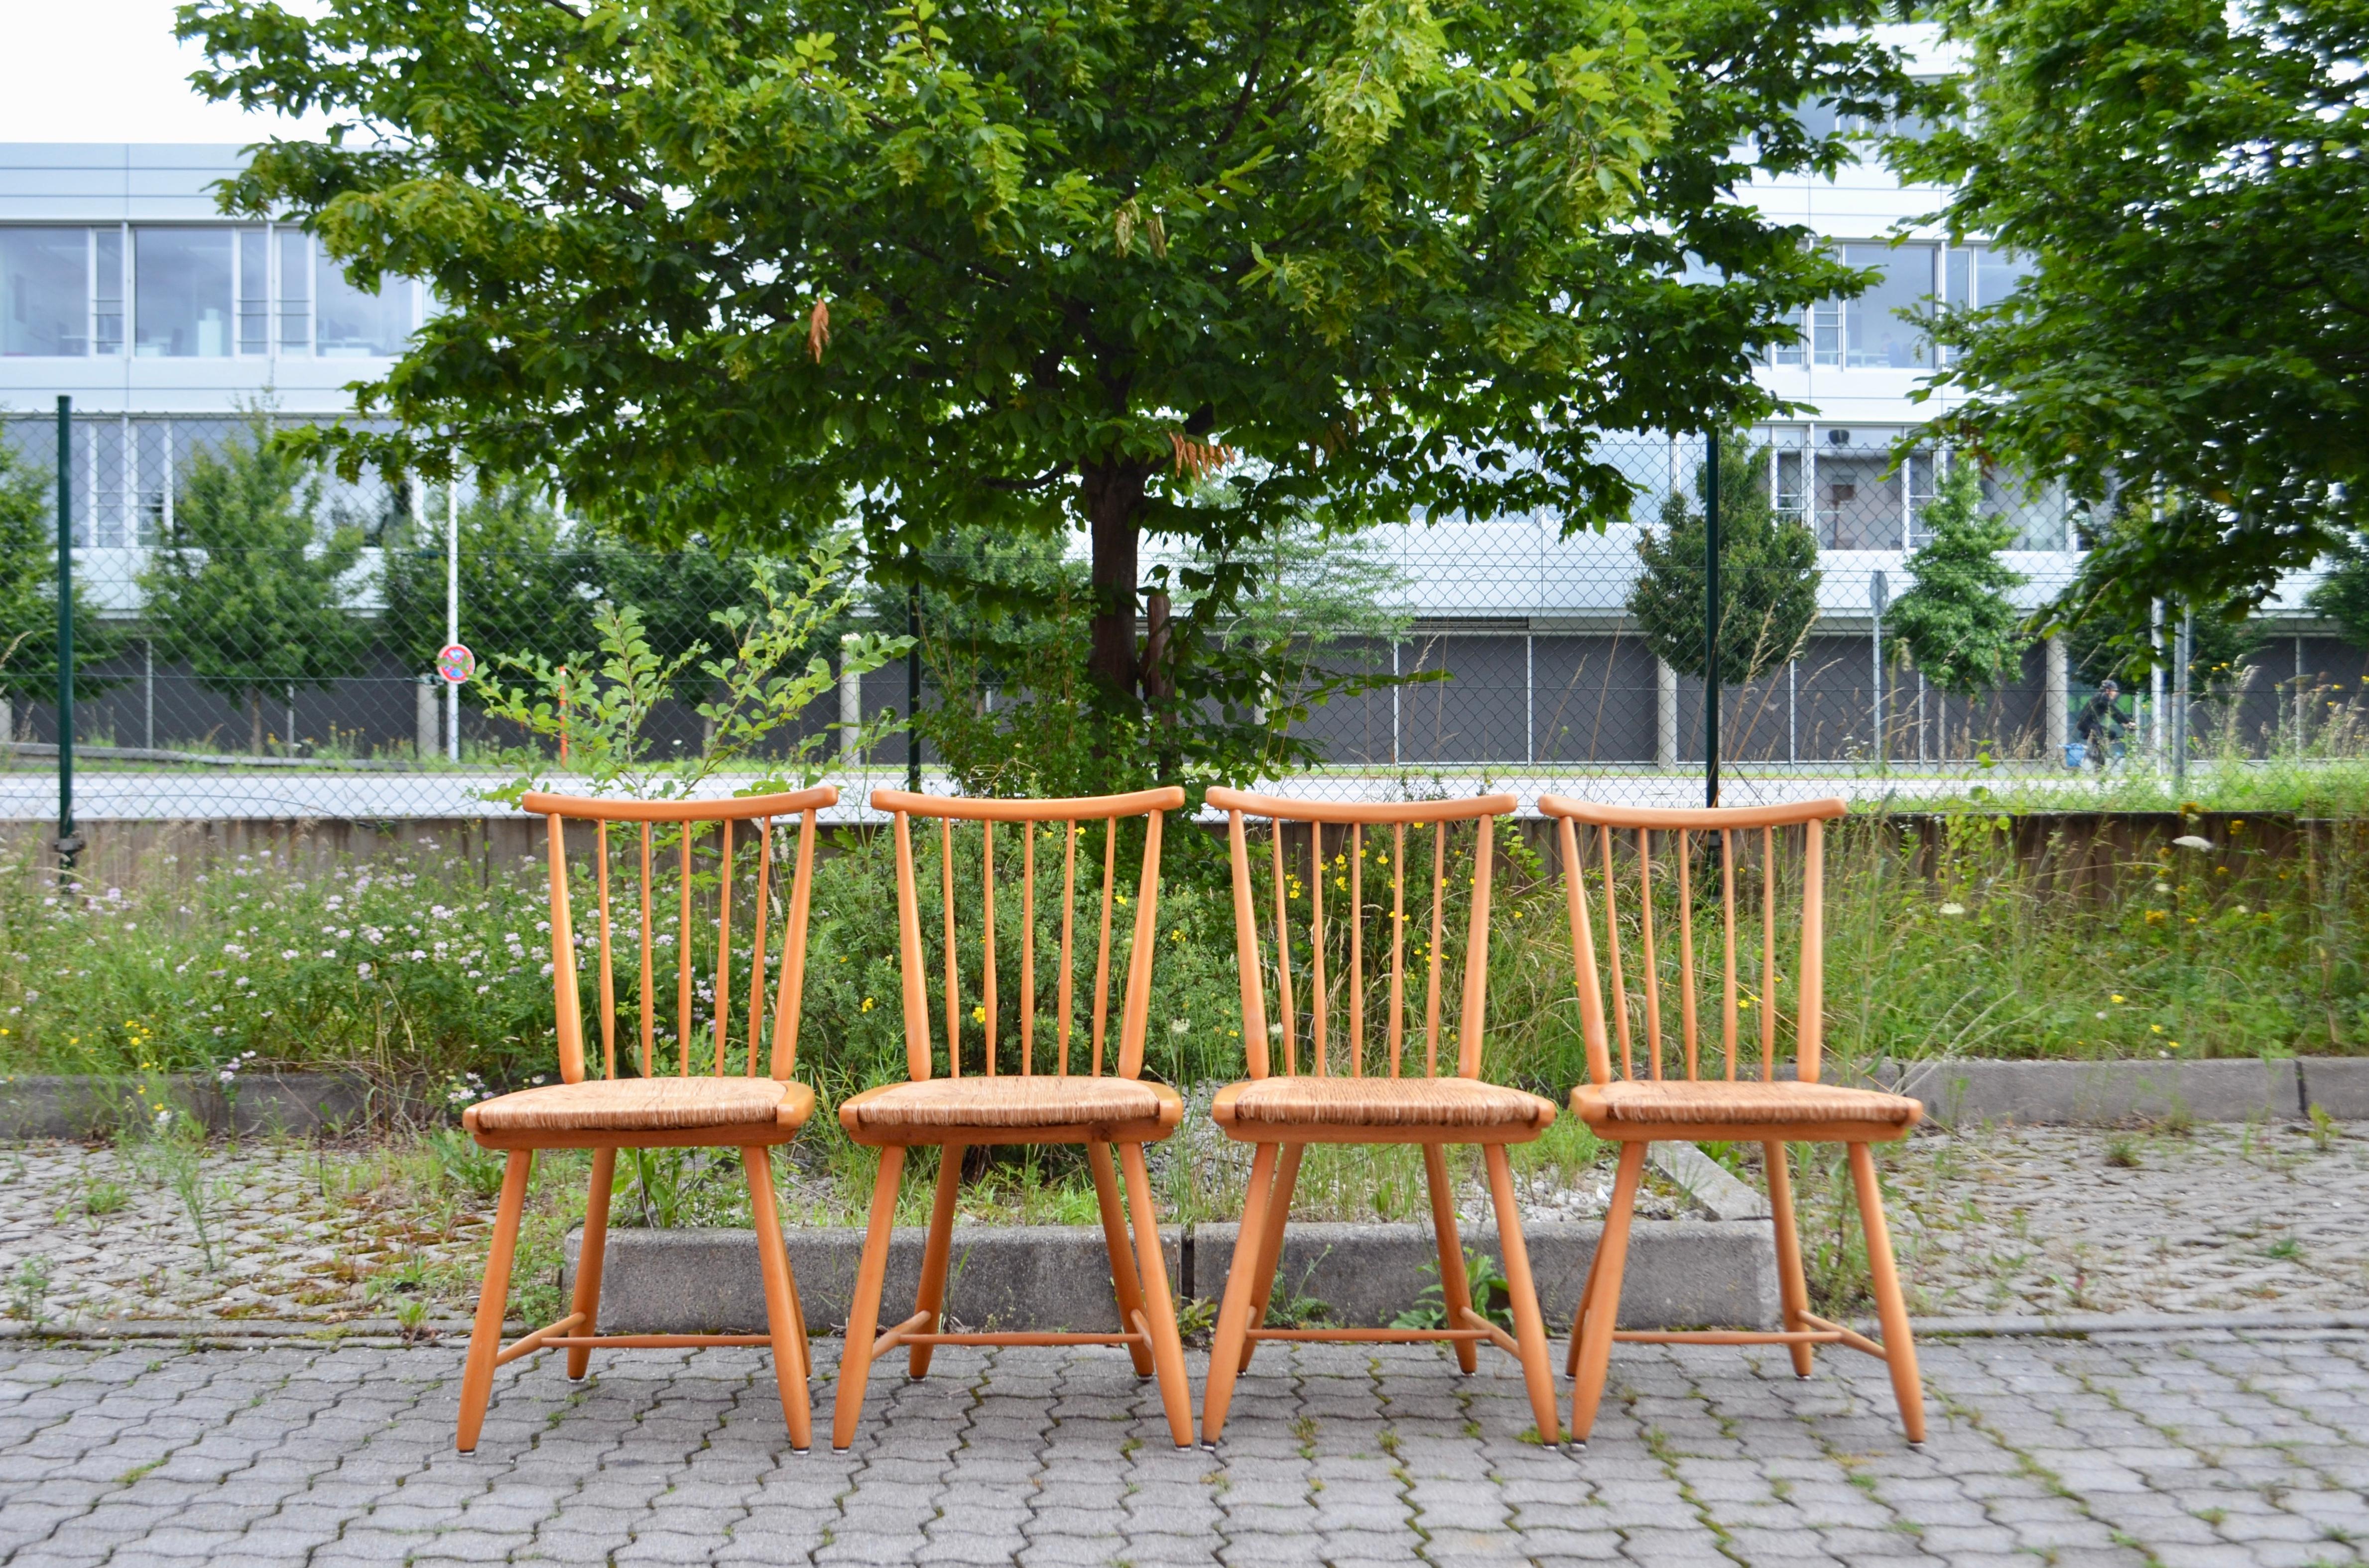 Dining chairs designed by German architect Arno Lambrecht for WK Möbel.
From the WKS Series.
Made of beechwood and Papercord.
From the Shaker movement inspired design.
Set of 4 chairs.